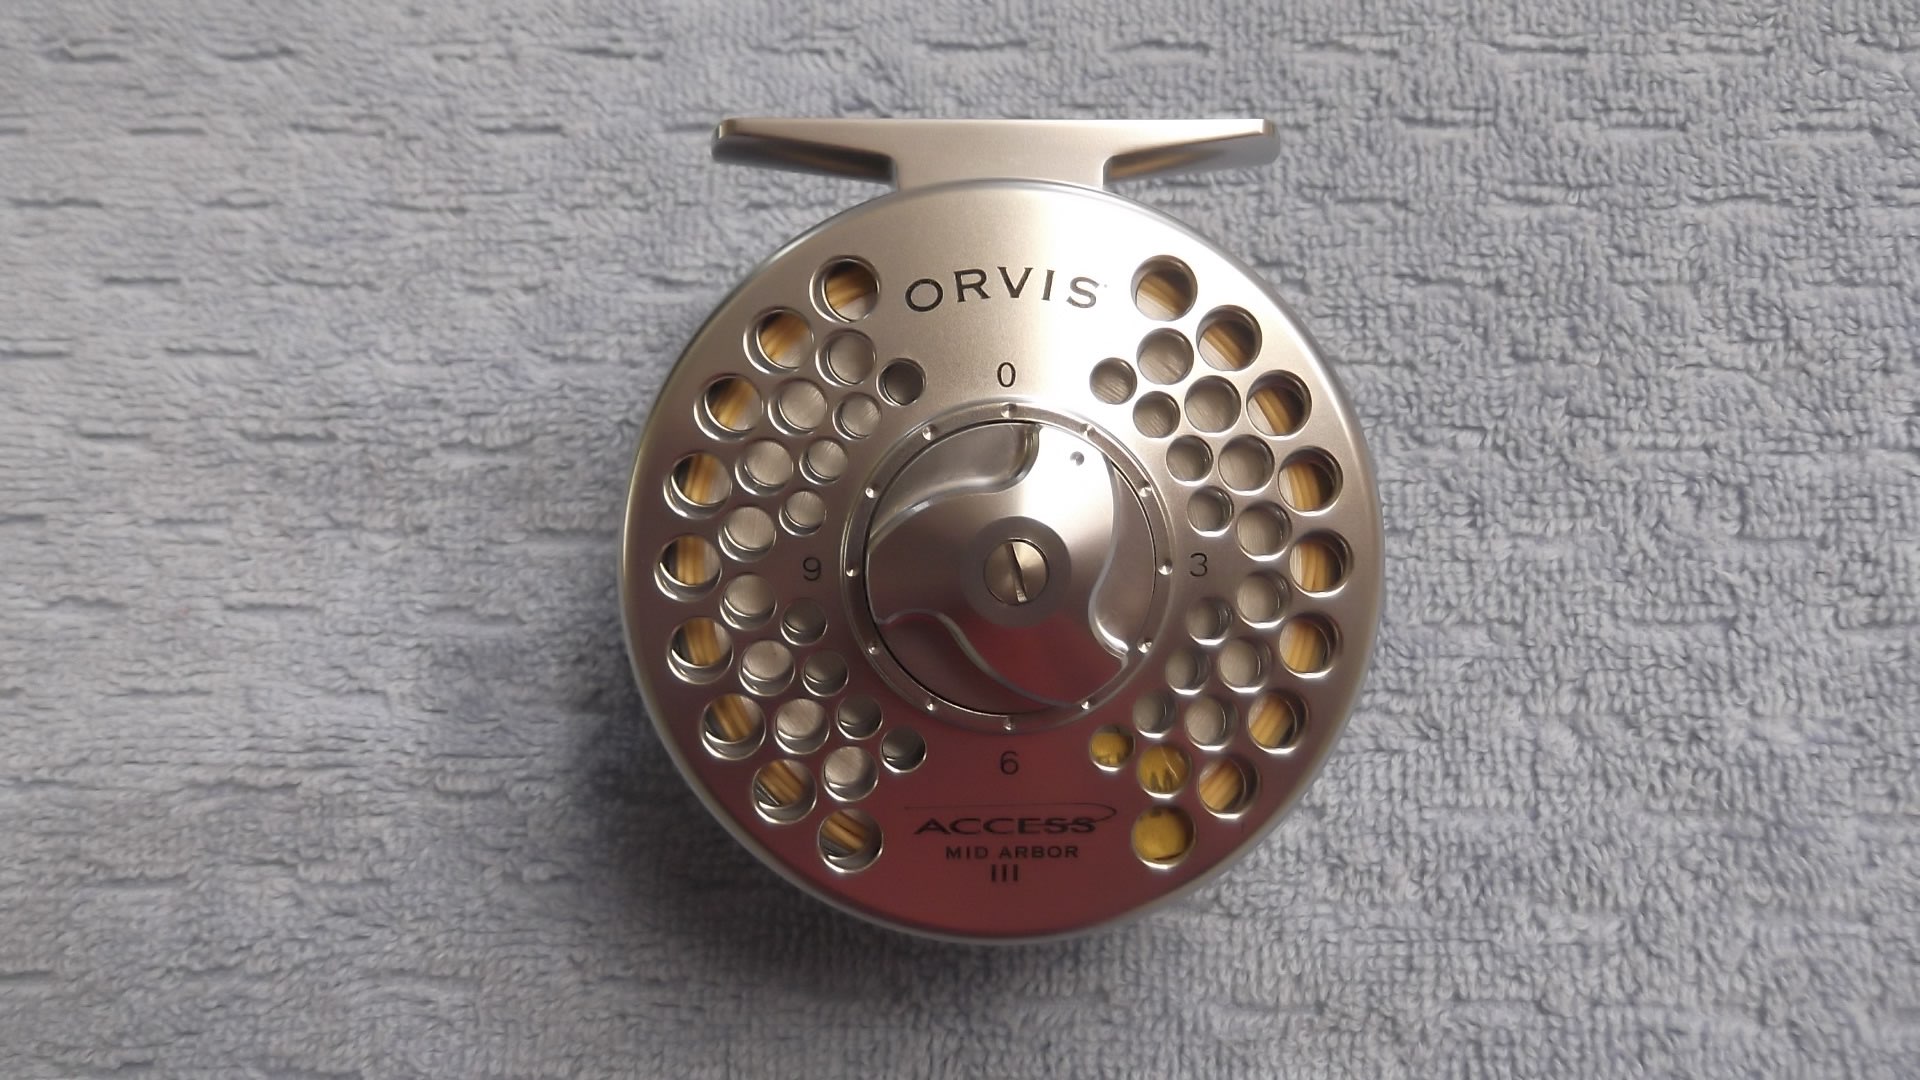 Orvis Access Mid-Arbor Reel - I went with the Access Model I for